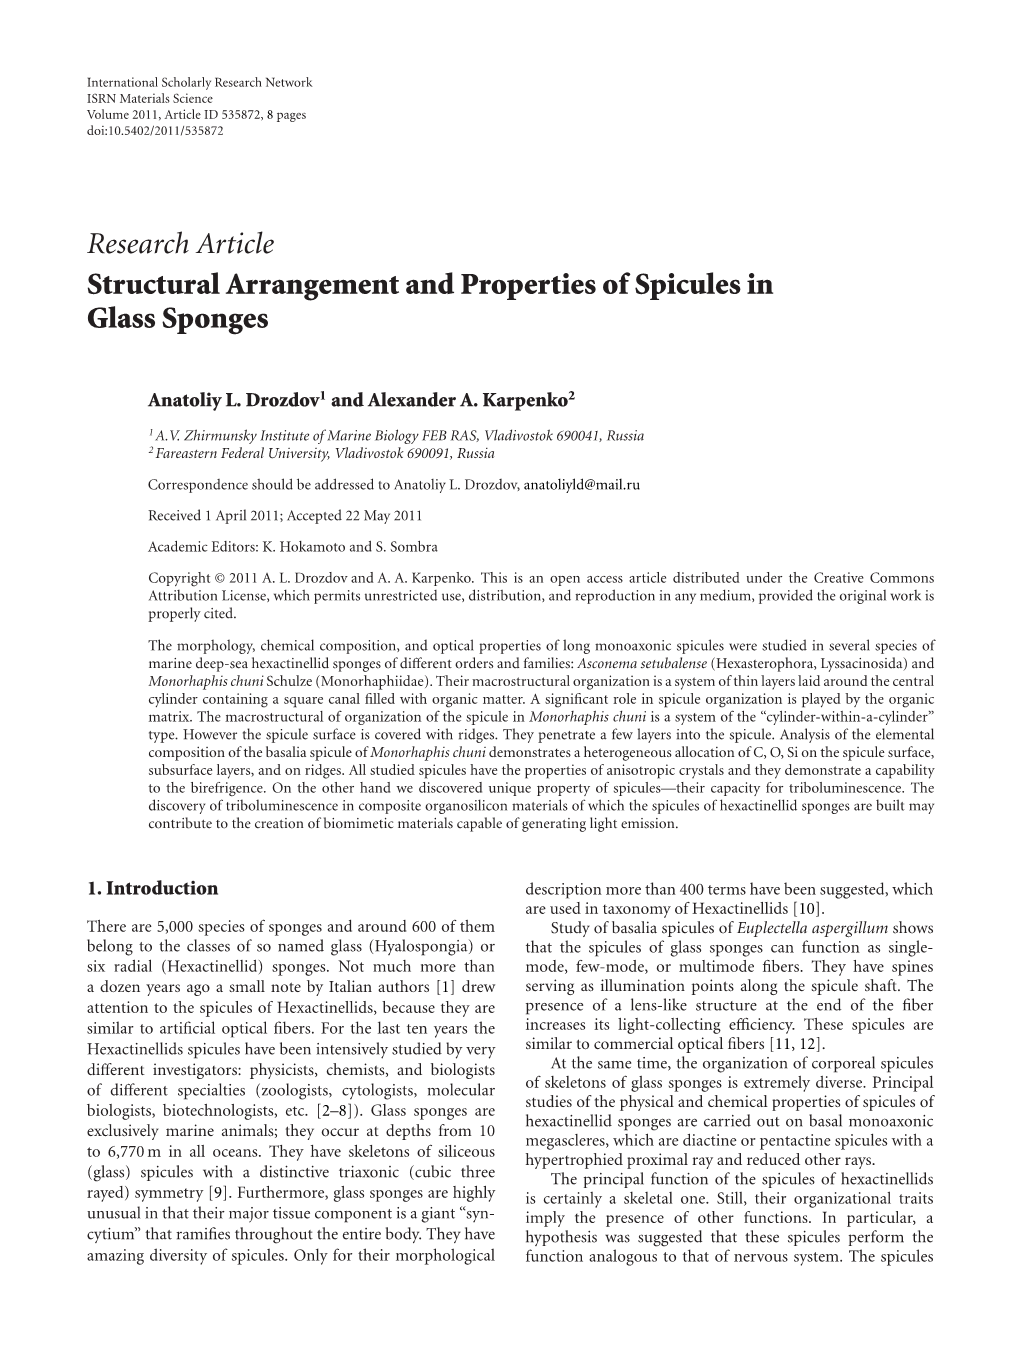 Structural Arrangement and Properties of Spicules in Glass Sponges